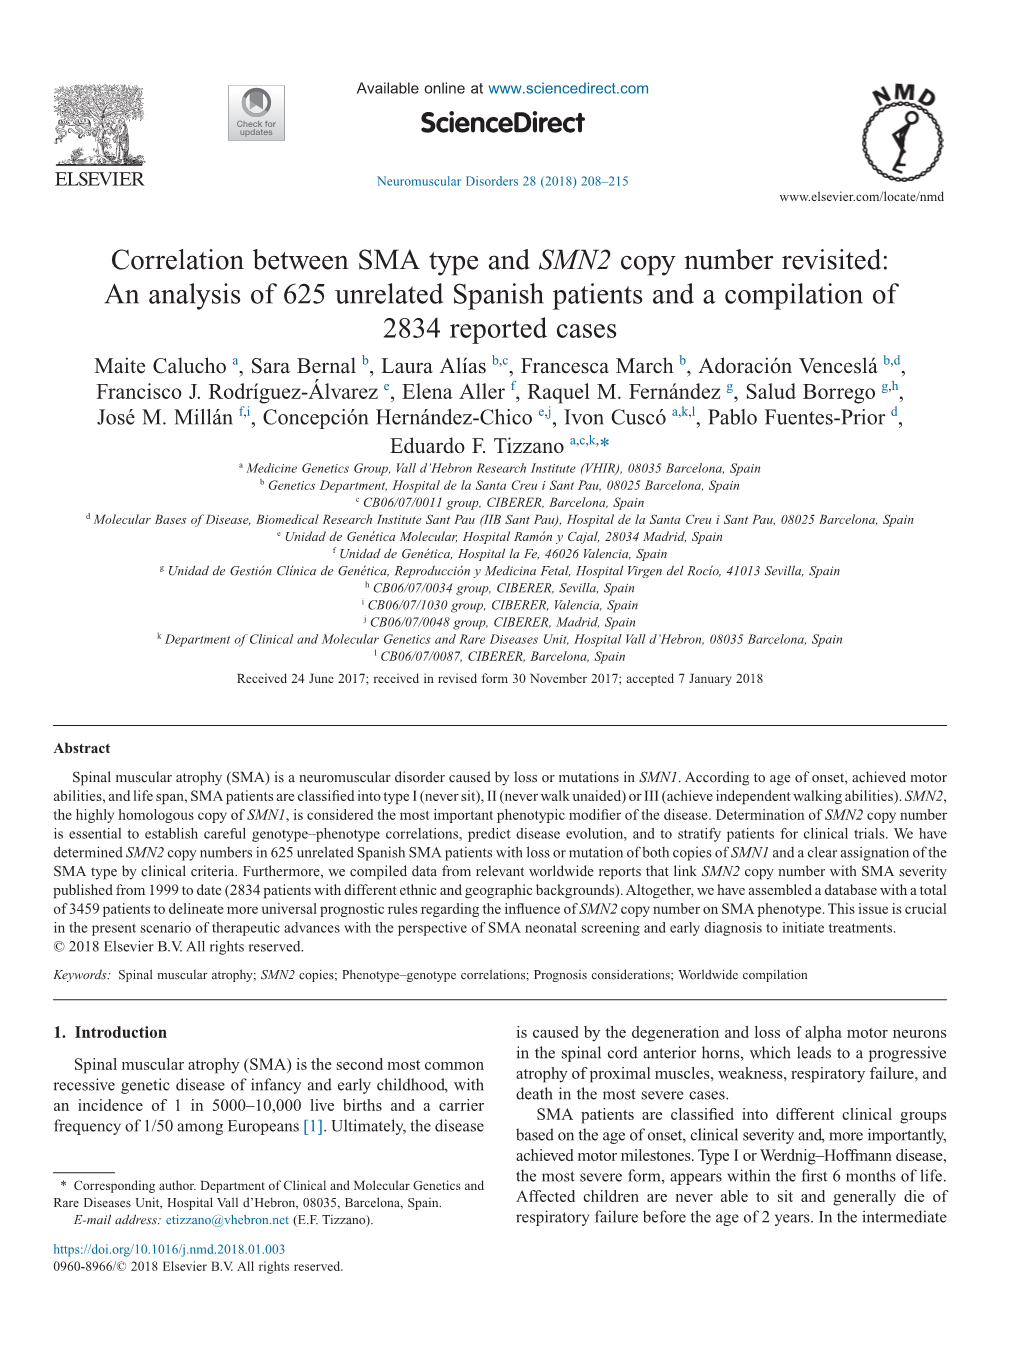 Correlation Between SMA Type and SMN2 Copy Number Revisited: An